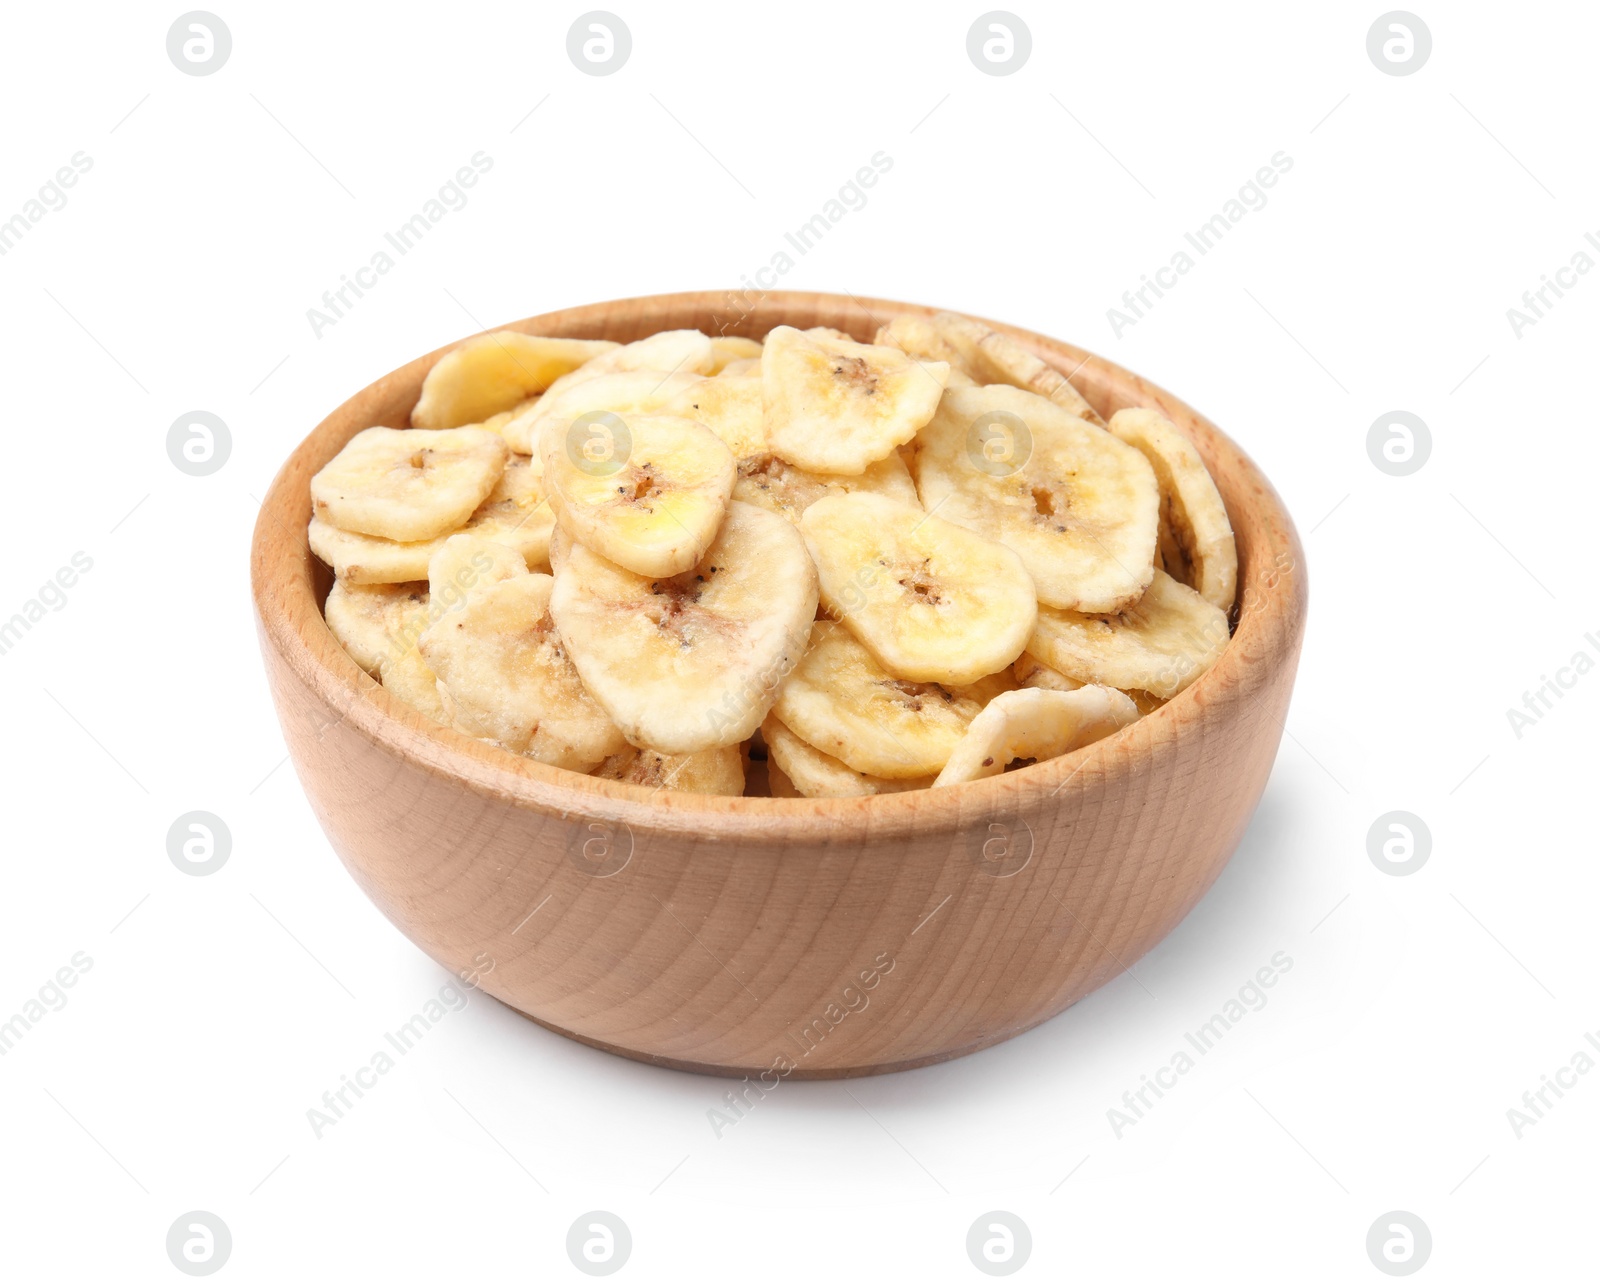 Photo of Wooden bowl with sweet banana slices on white background. Dried fruit as healthy snack